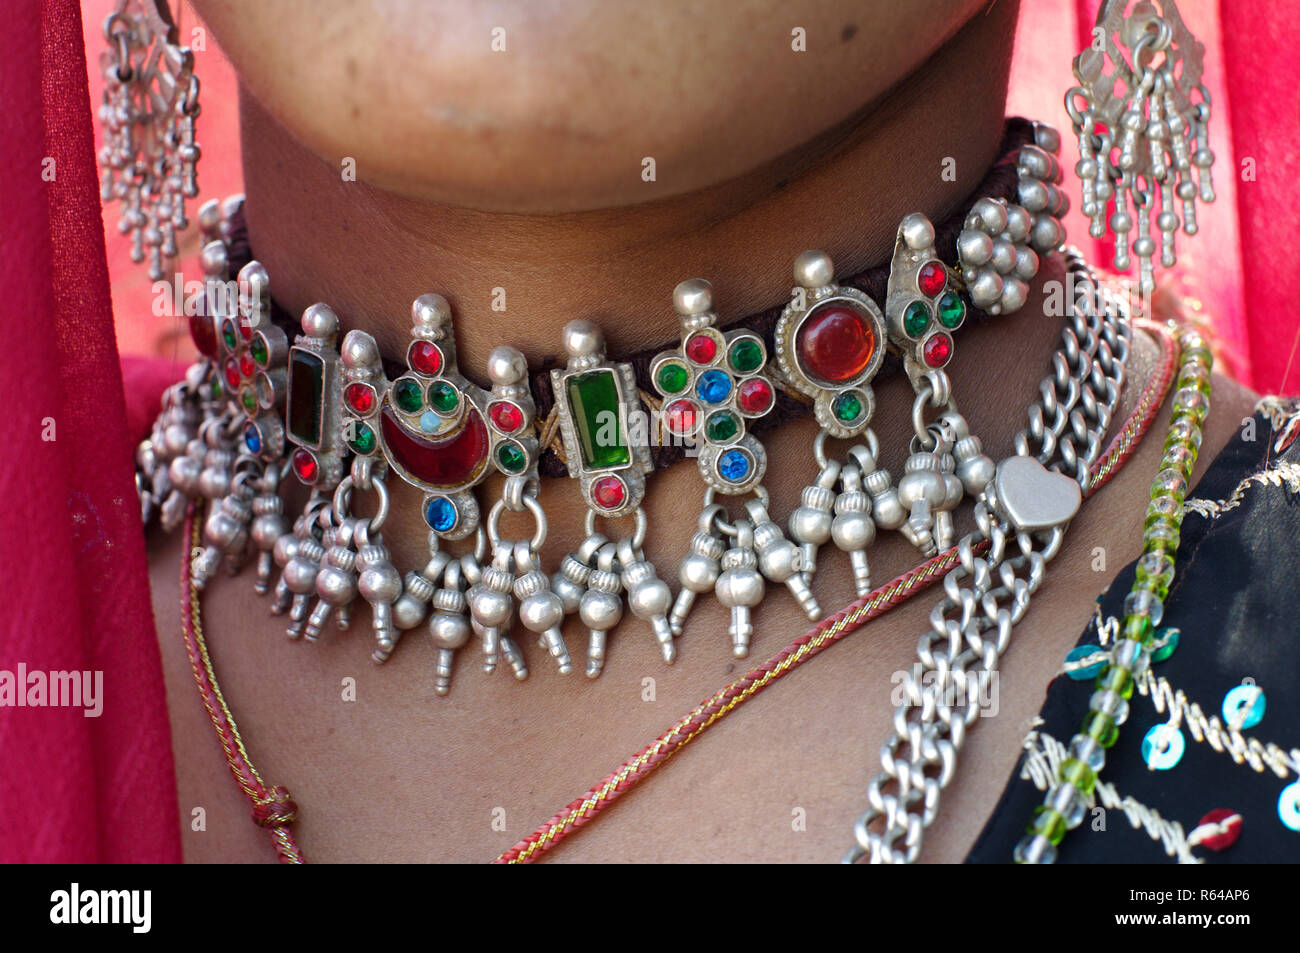 Rabari woman with necklace Stock Photo